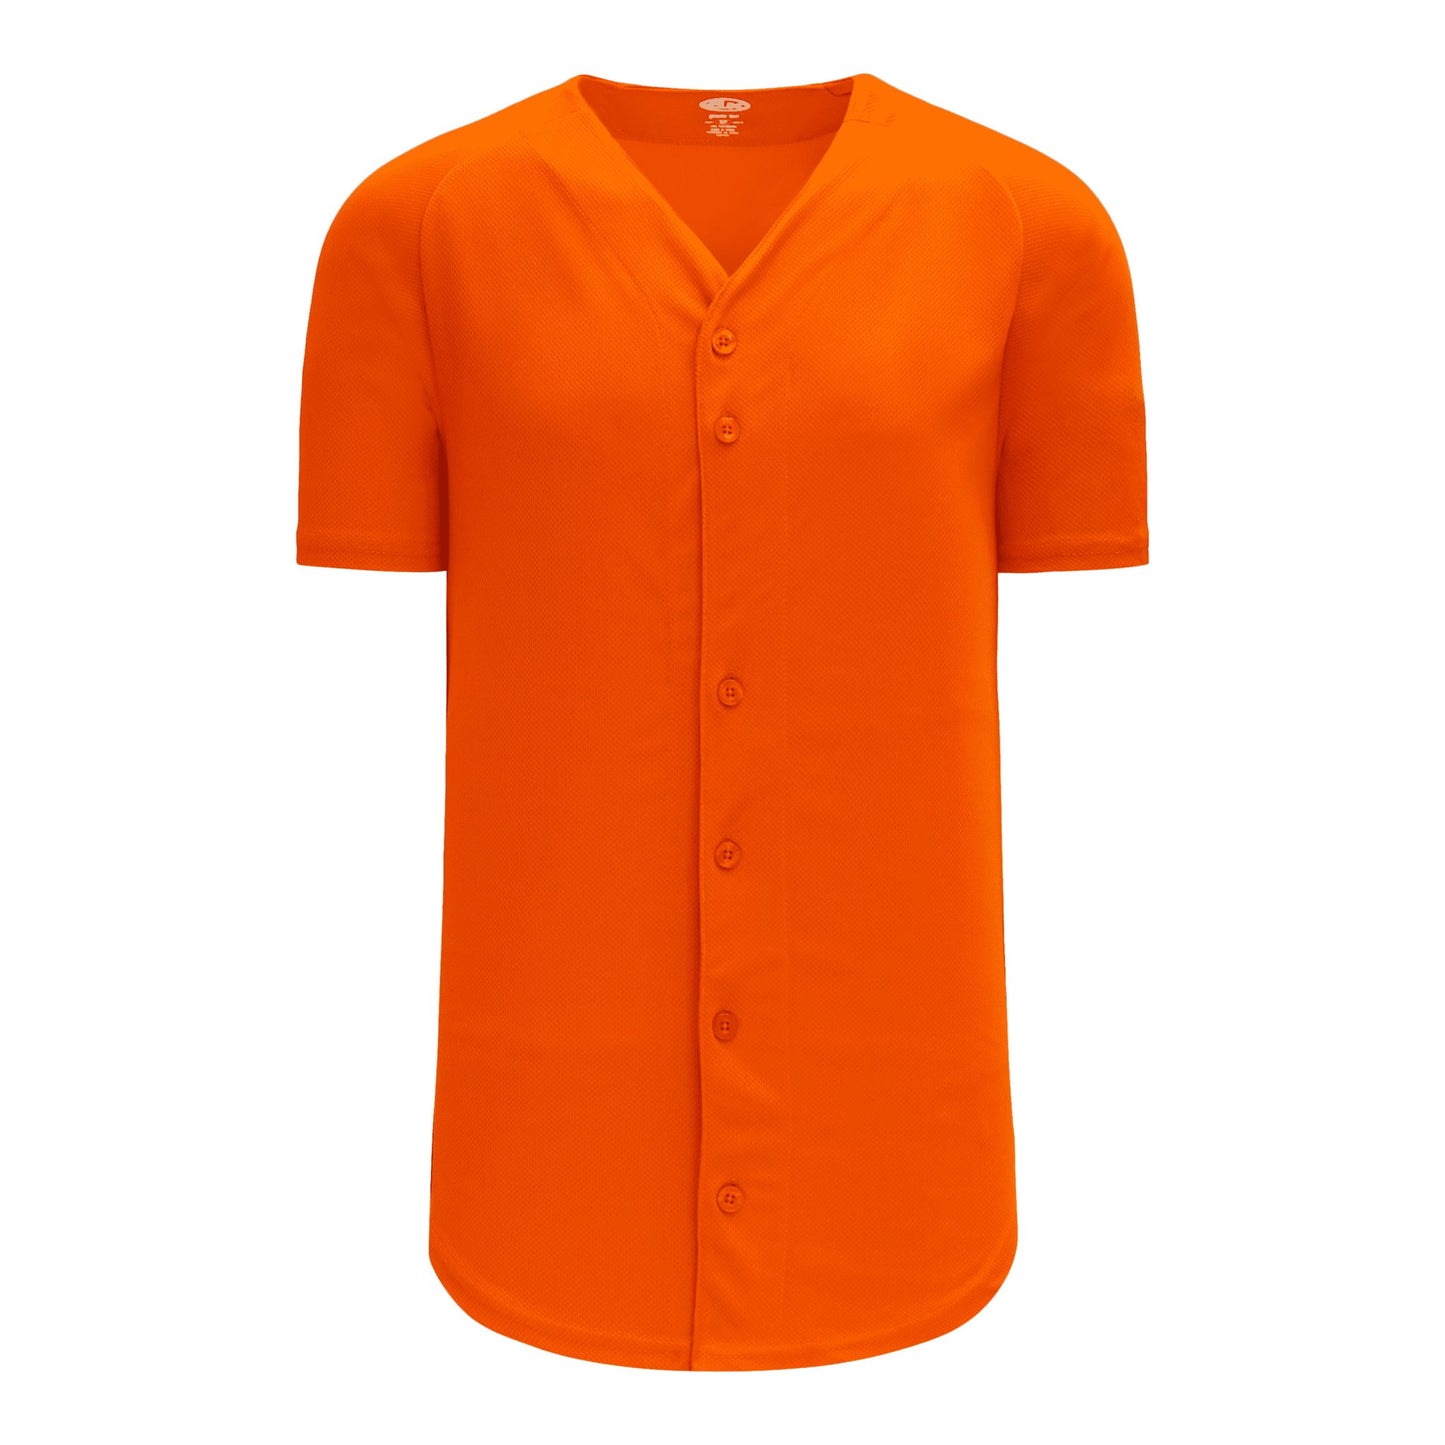 Full Button Baseball Jerseys: Solid Colours, Youth